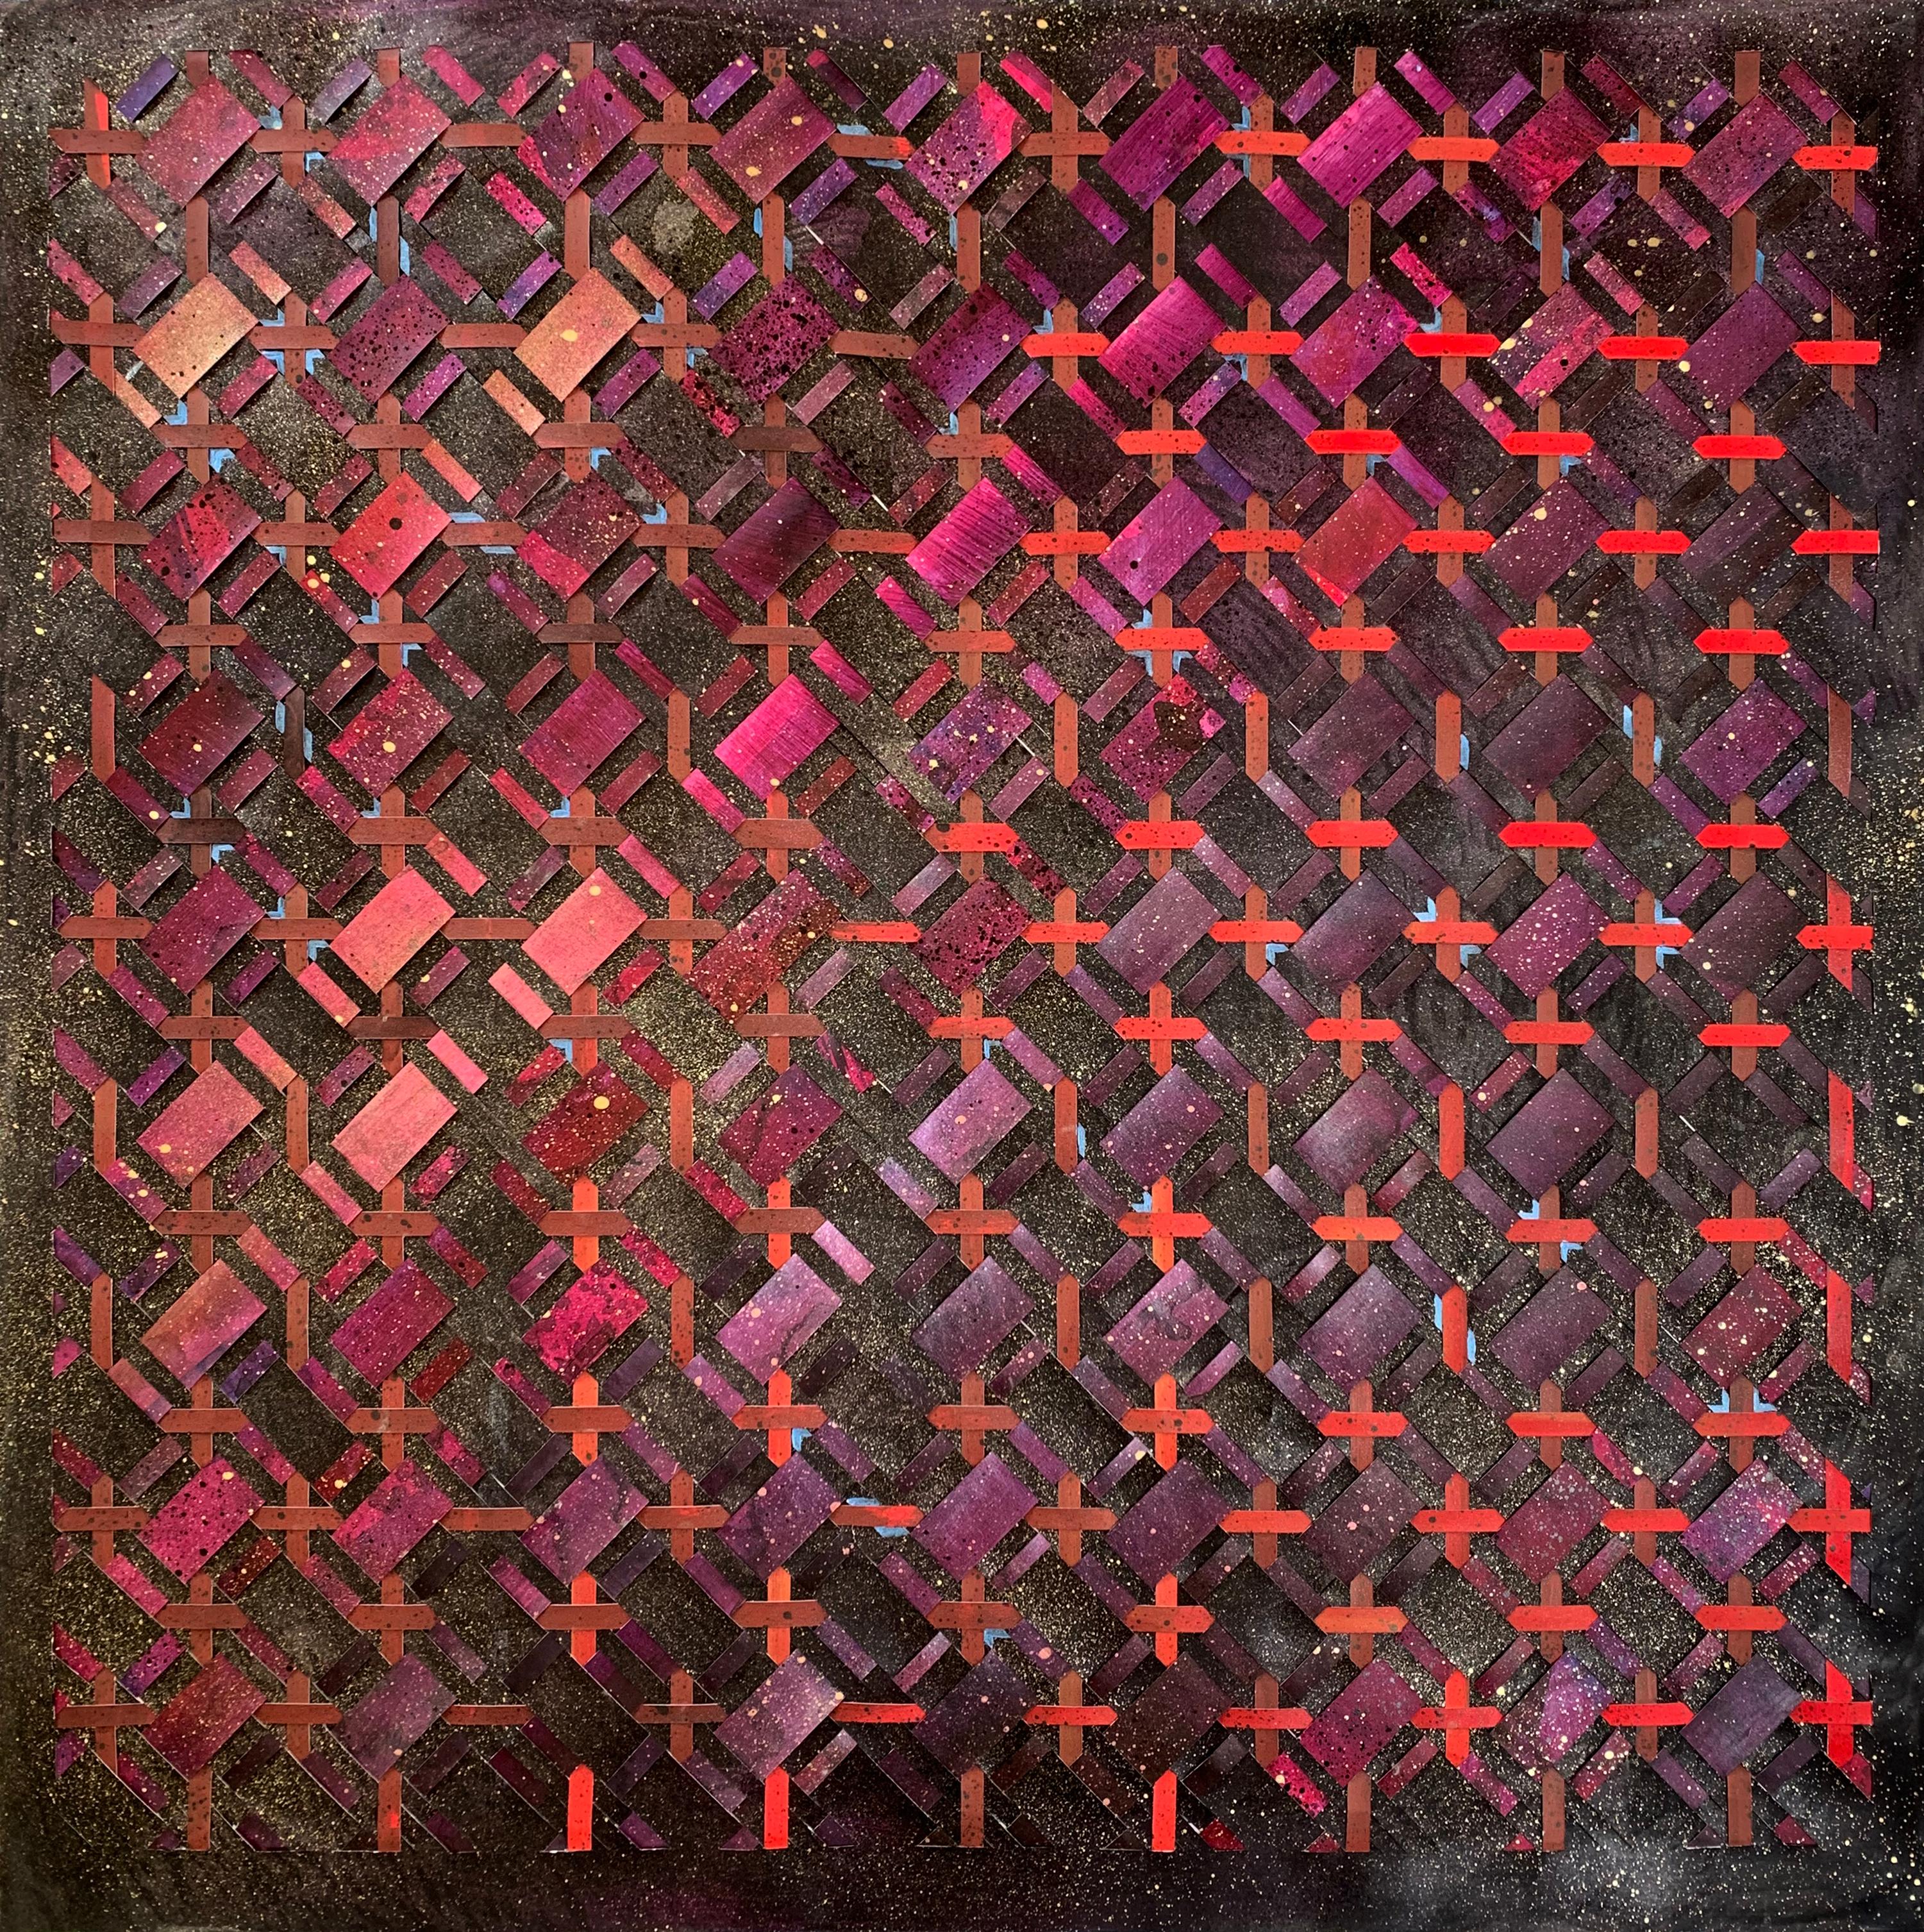 Mixed Media on Woven Fabriano Painting "African Night Sky"